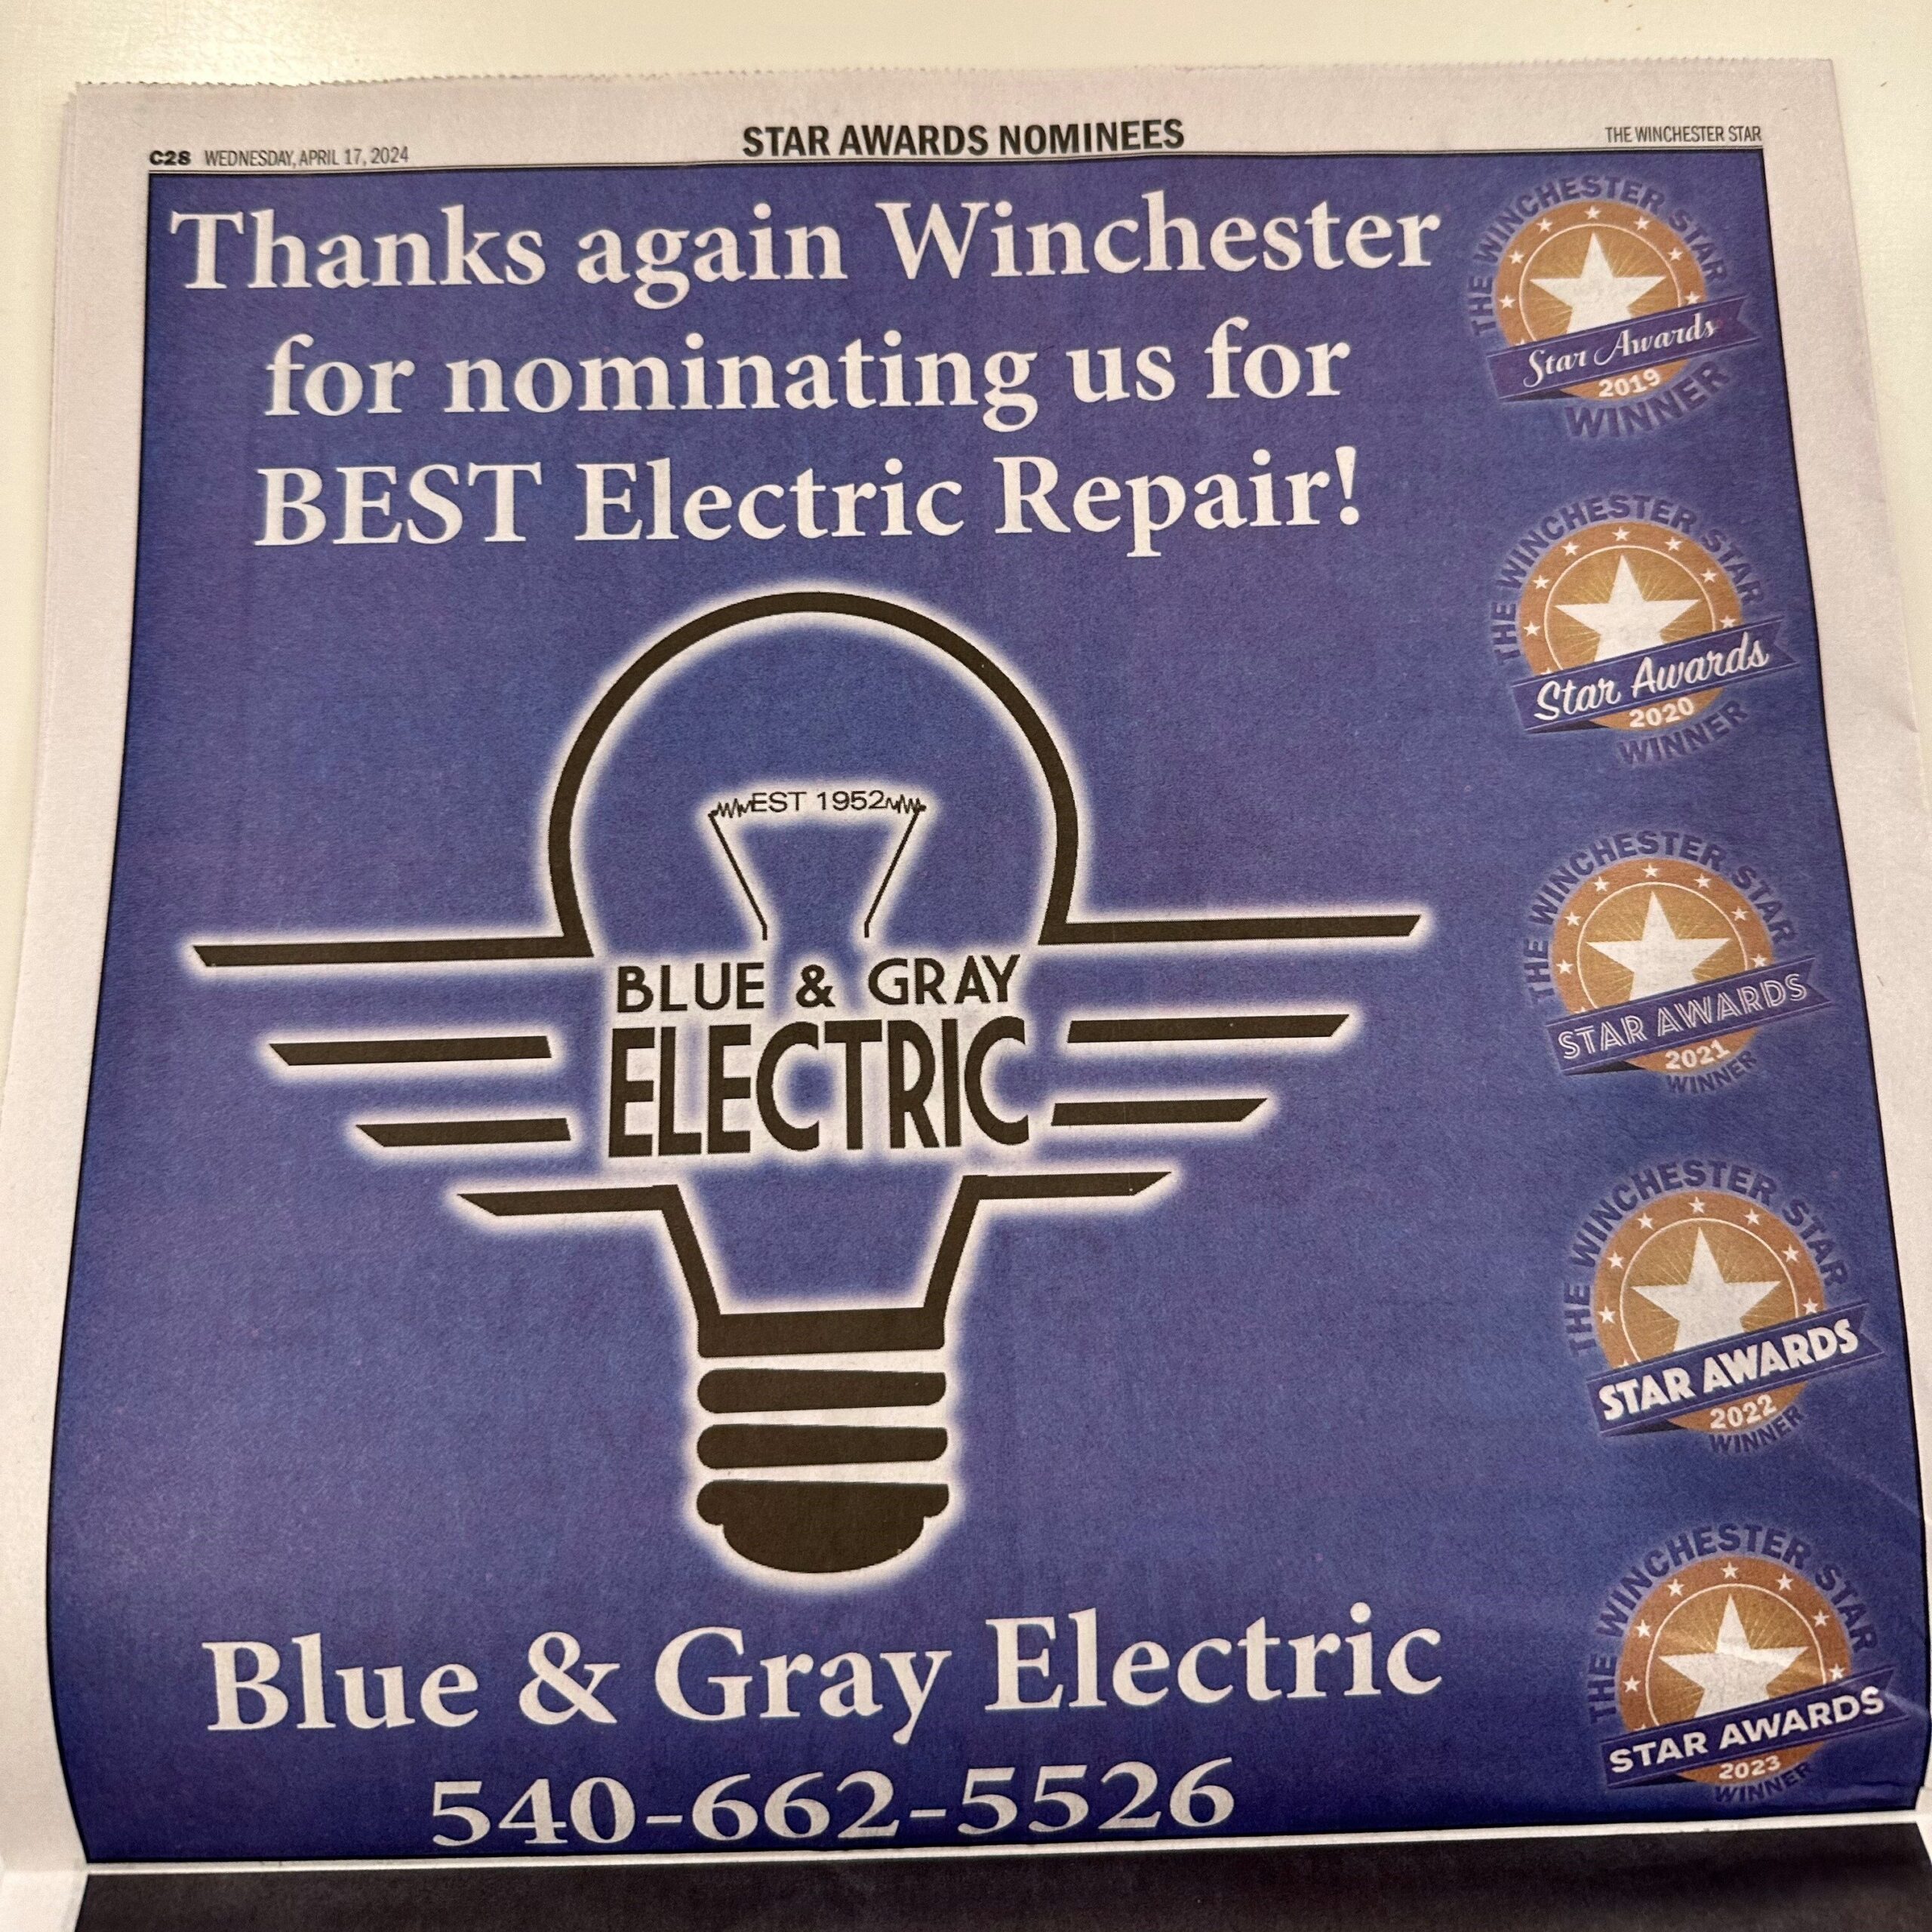 Blue & Gray Electric: Celebrating Five Years as Winchester’s Best